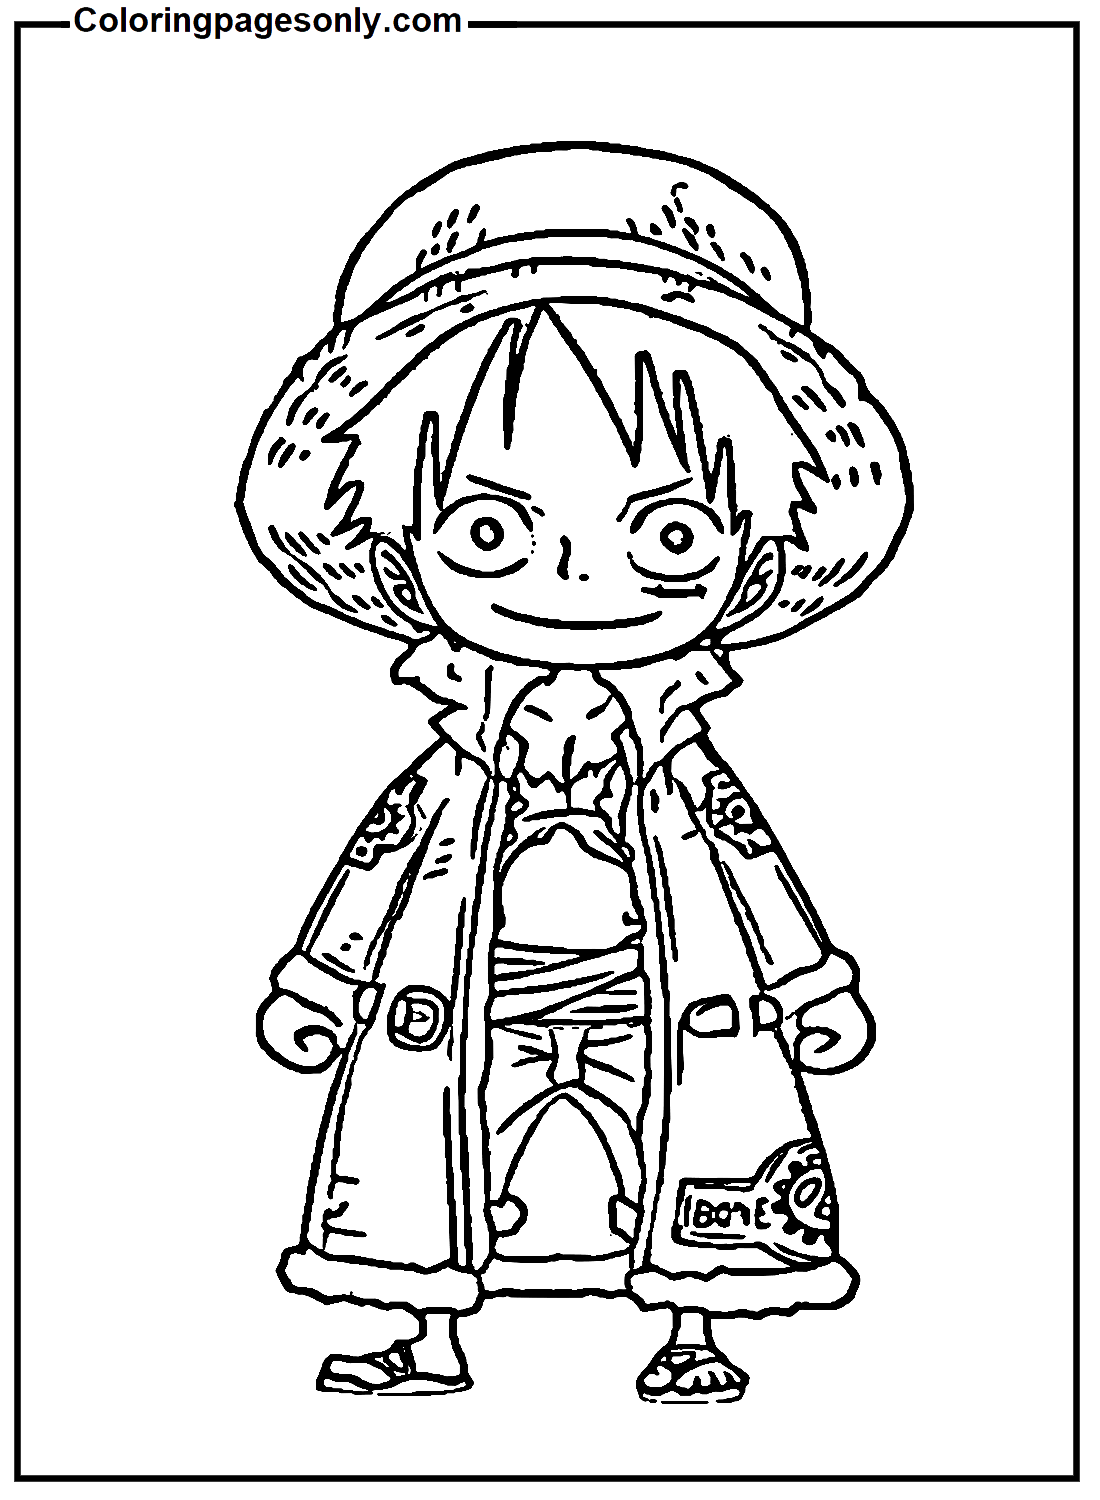 Luffy Image from Luffy